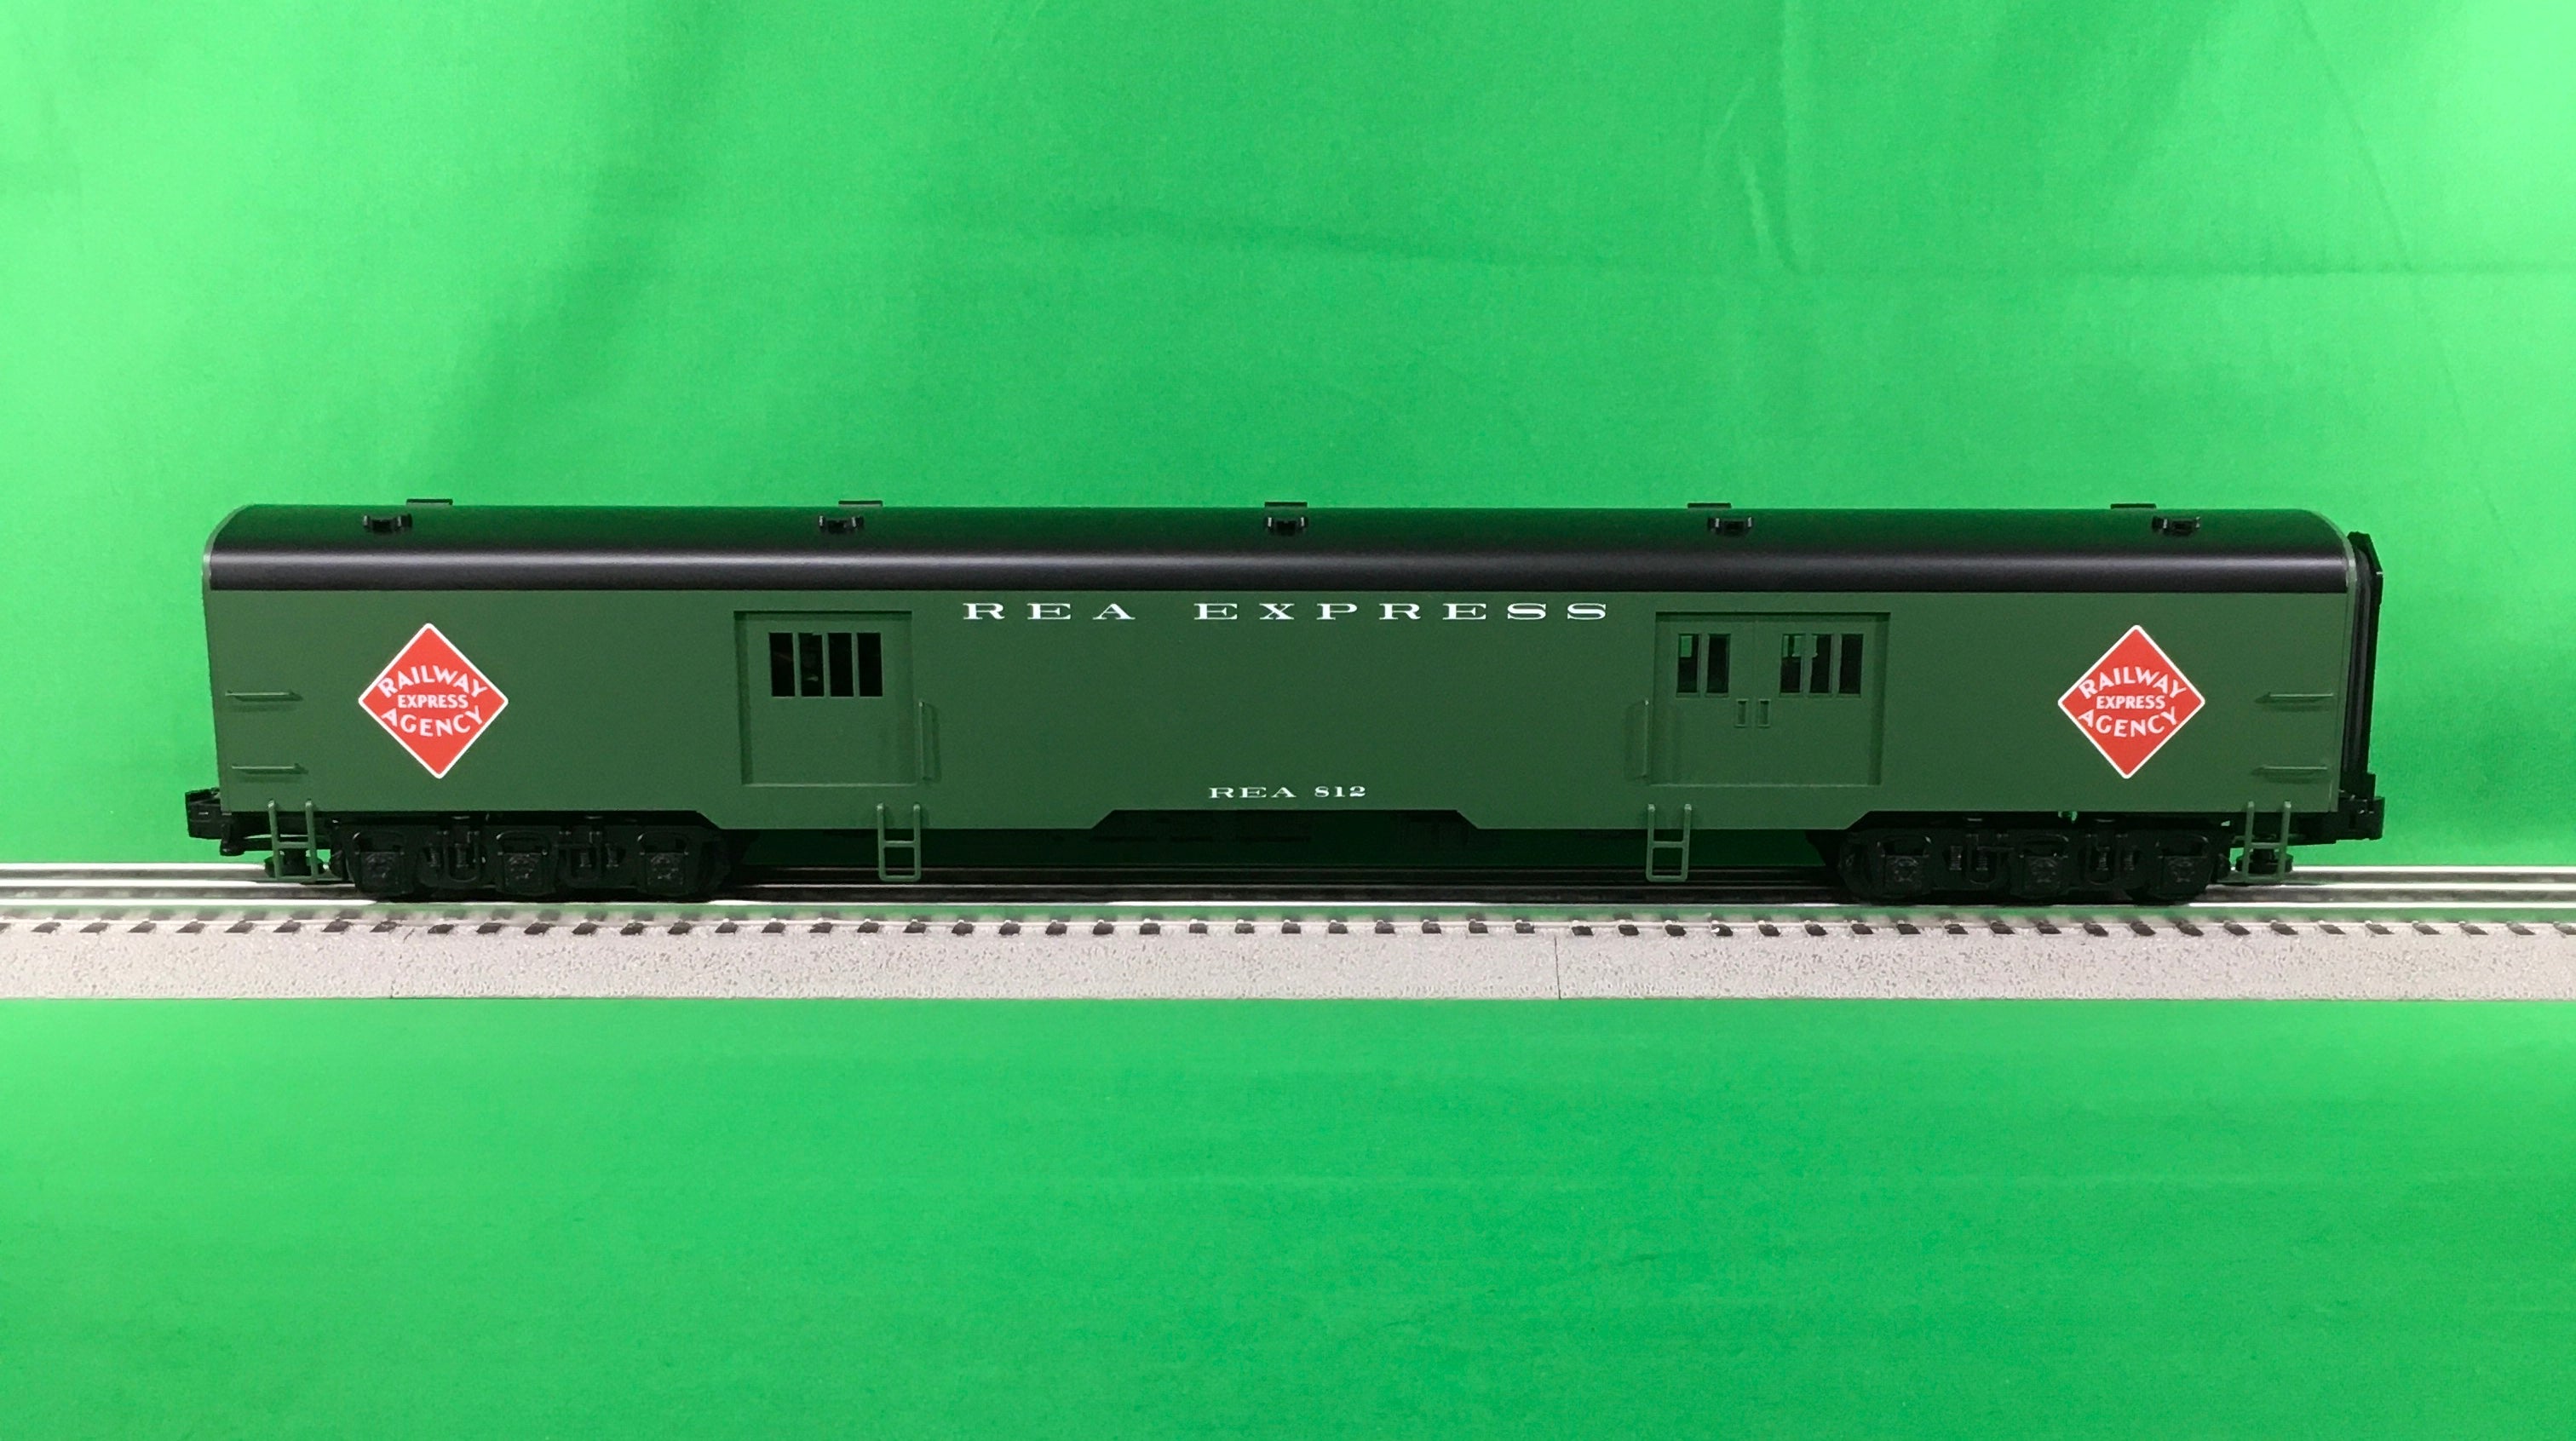 Lionel 2227560 - Vision Line Horse Cars "Railway Express Agency" #812